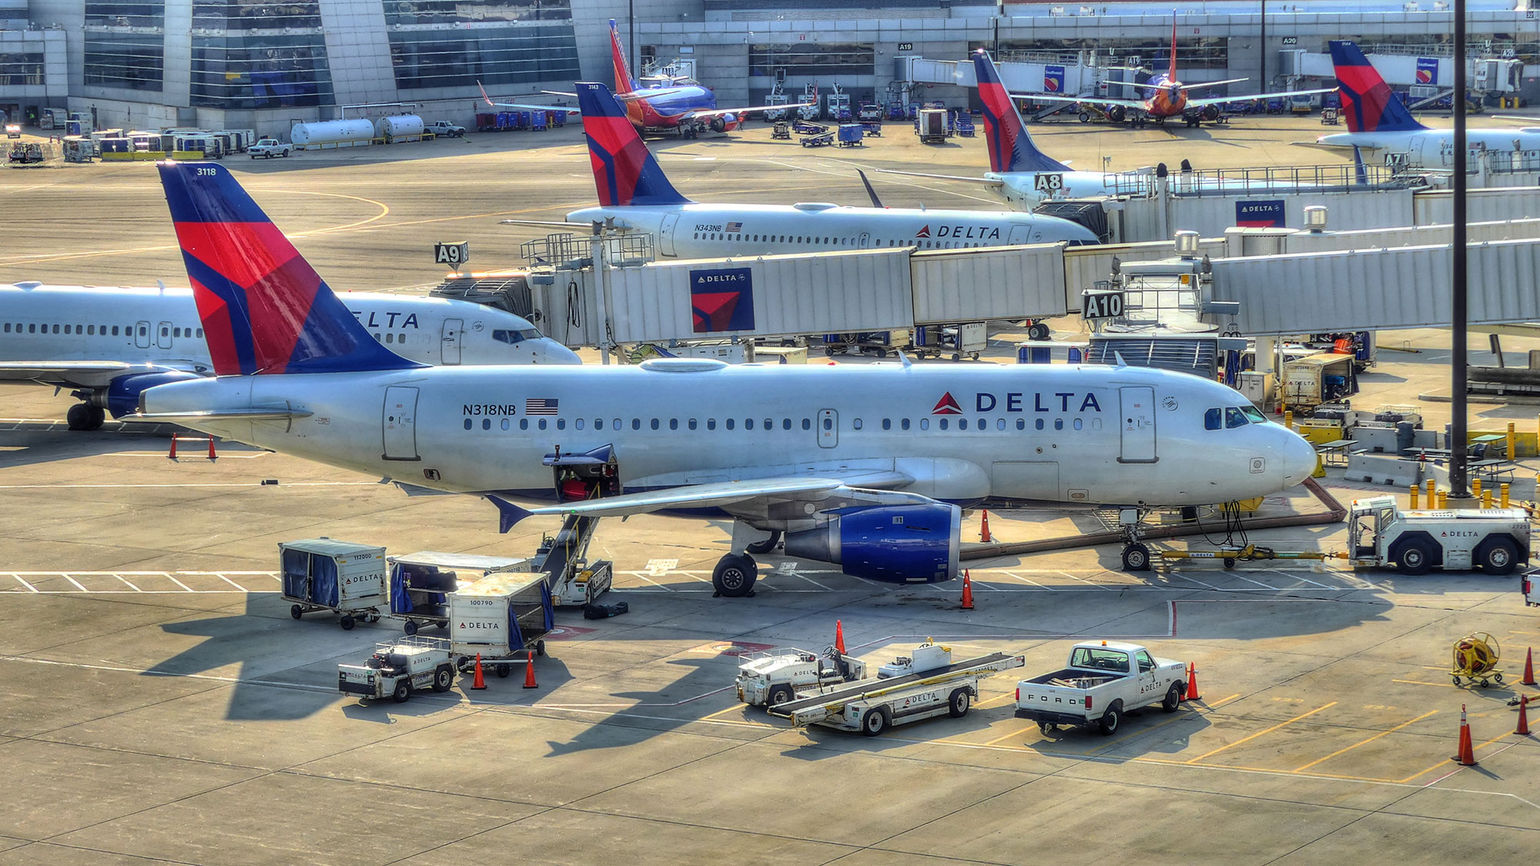 Delta: No more miles earned on Basic Economy fares